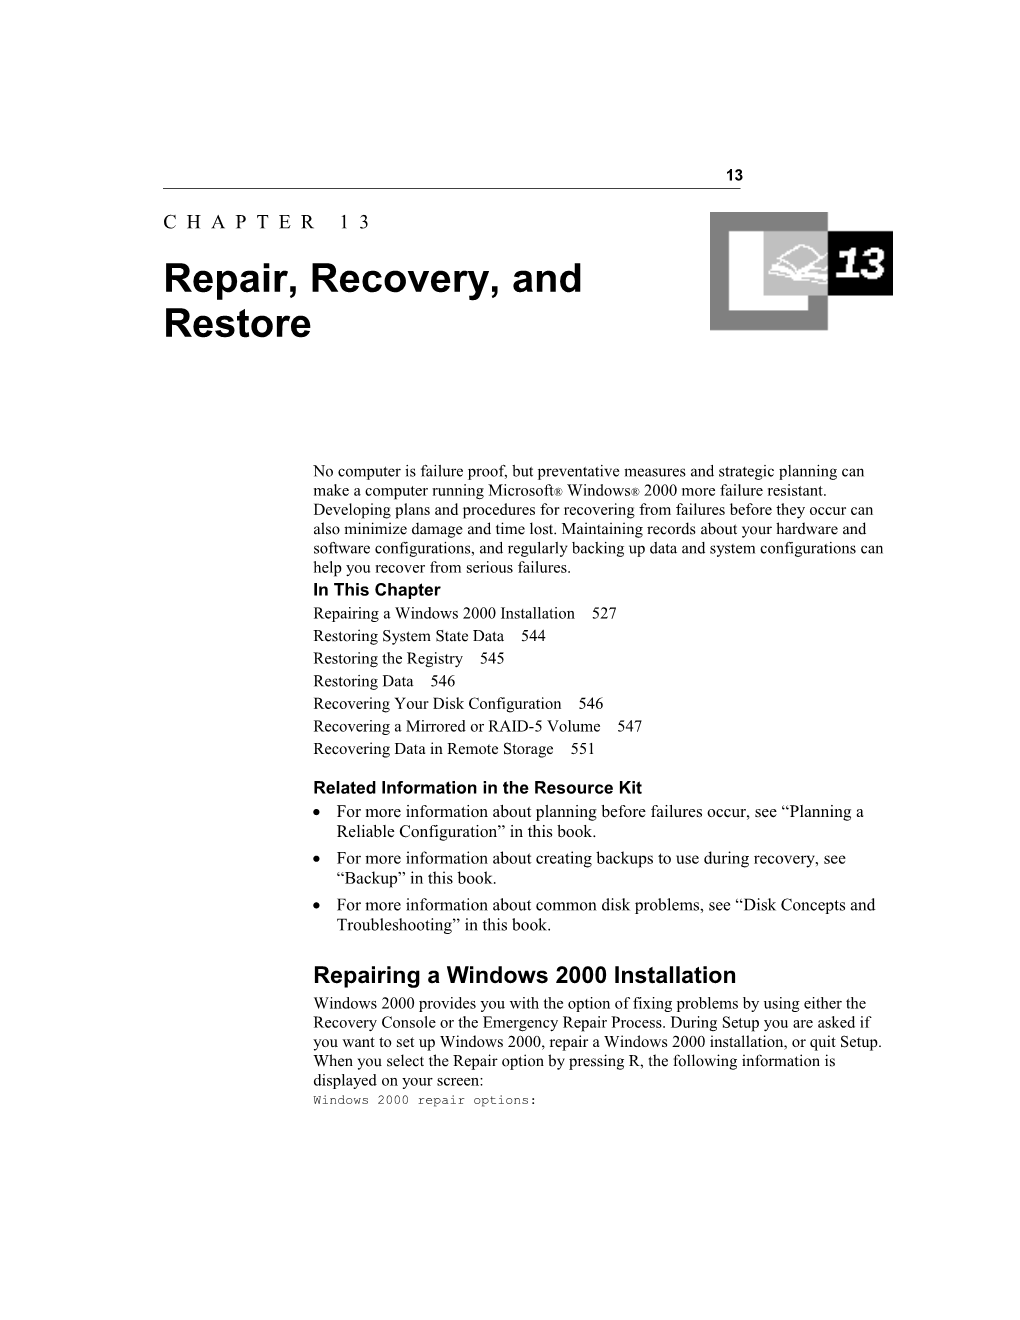 Chapter 13 Repair, Recovery, and Restore 1